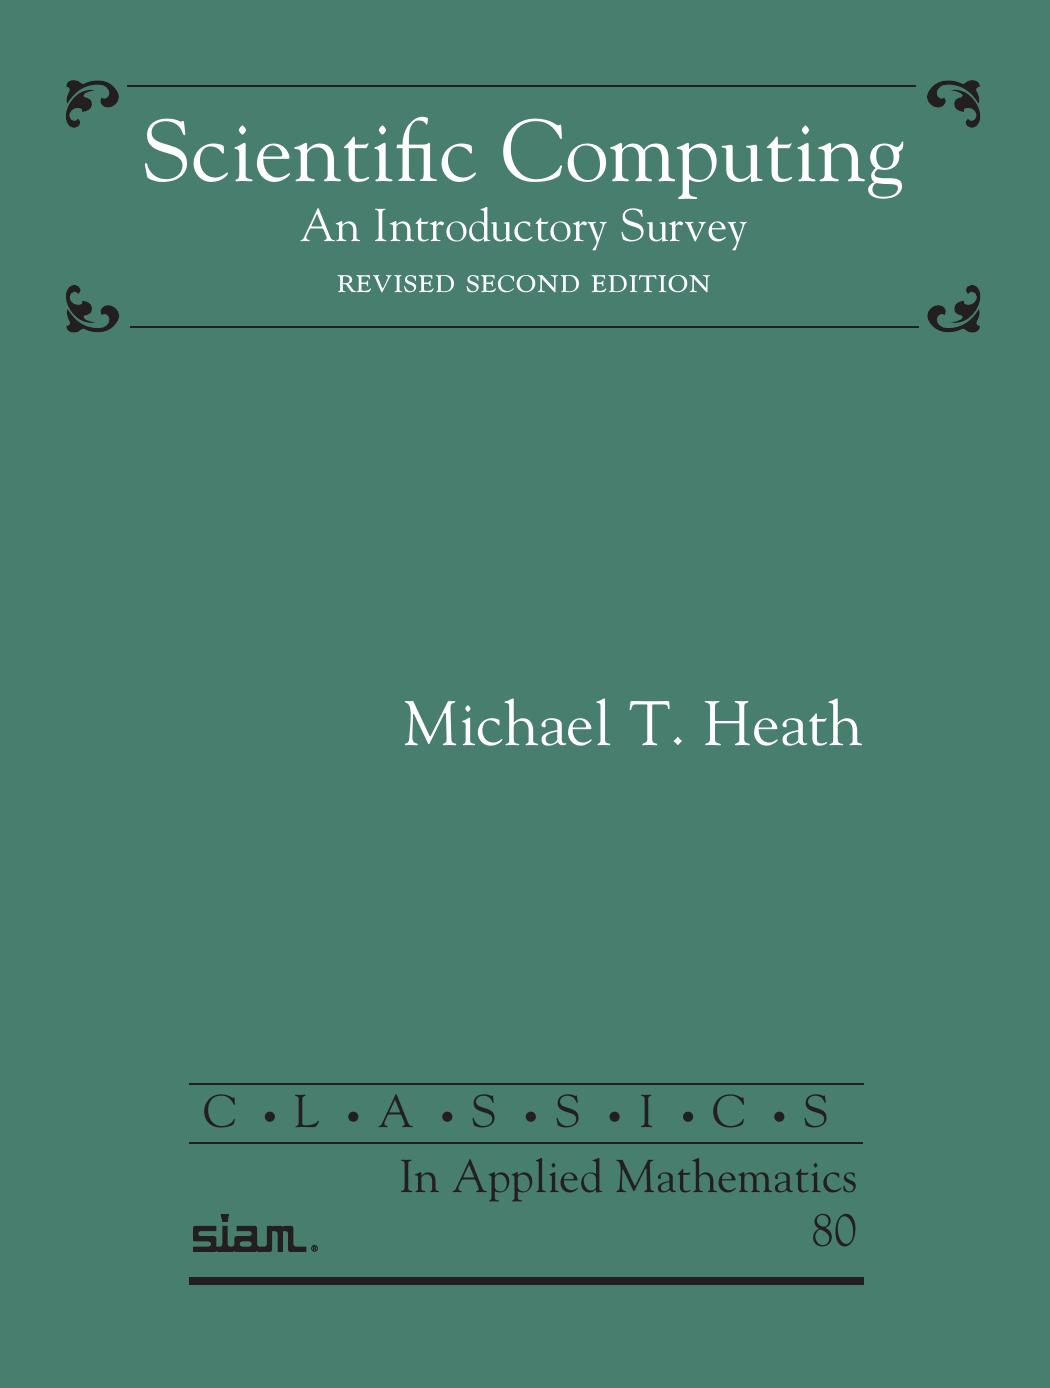 Scientific Computing: An Introductory Survey, Revised Second Edition